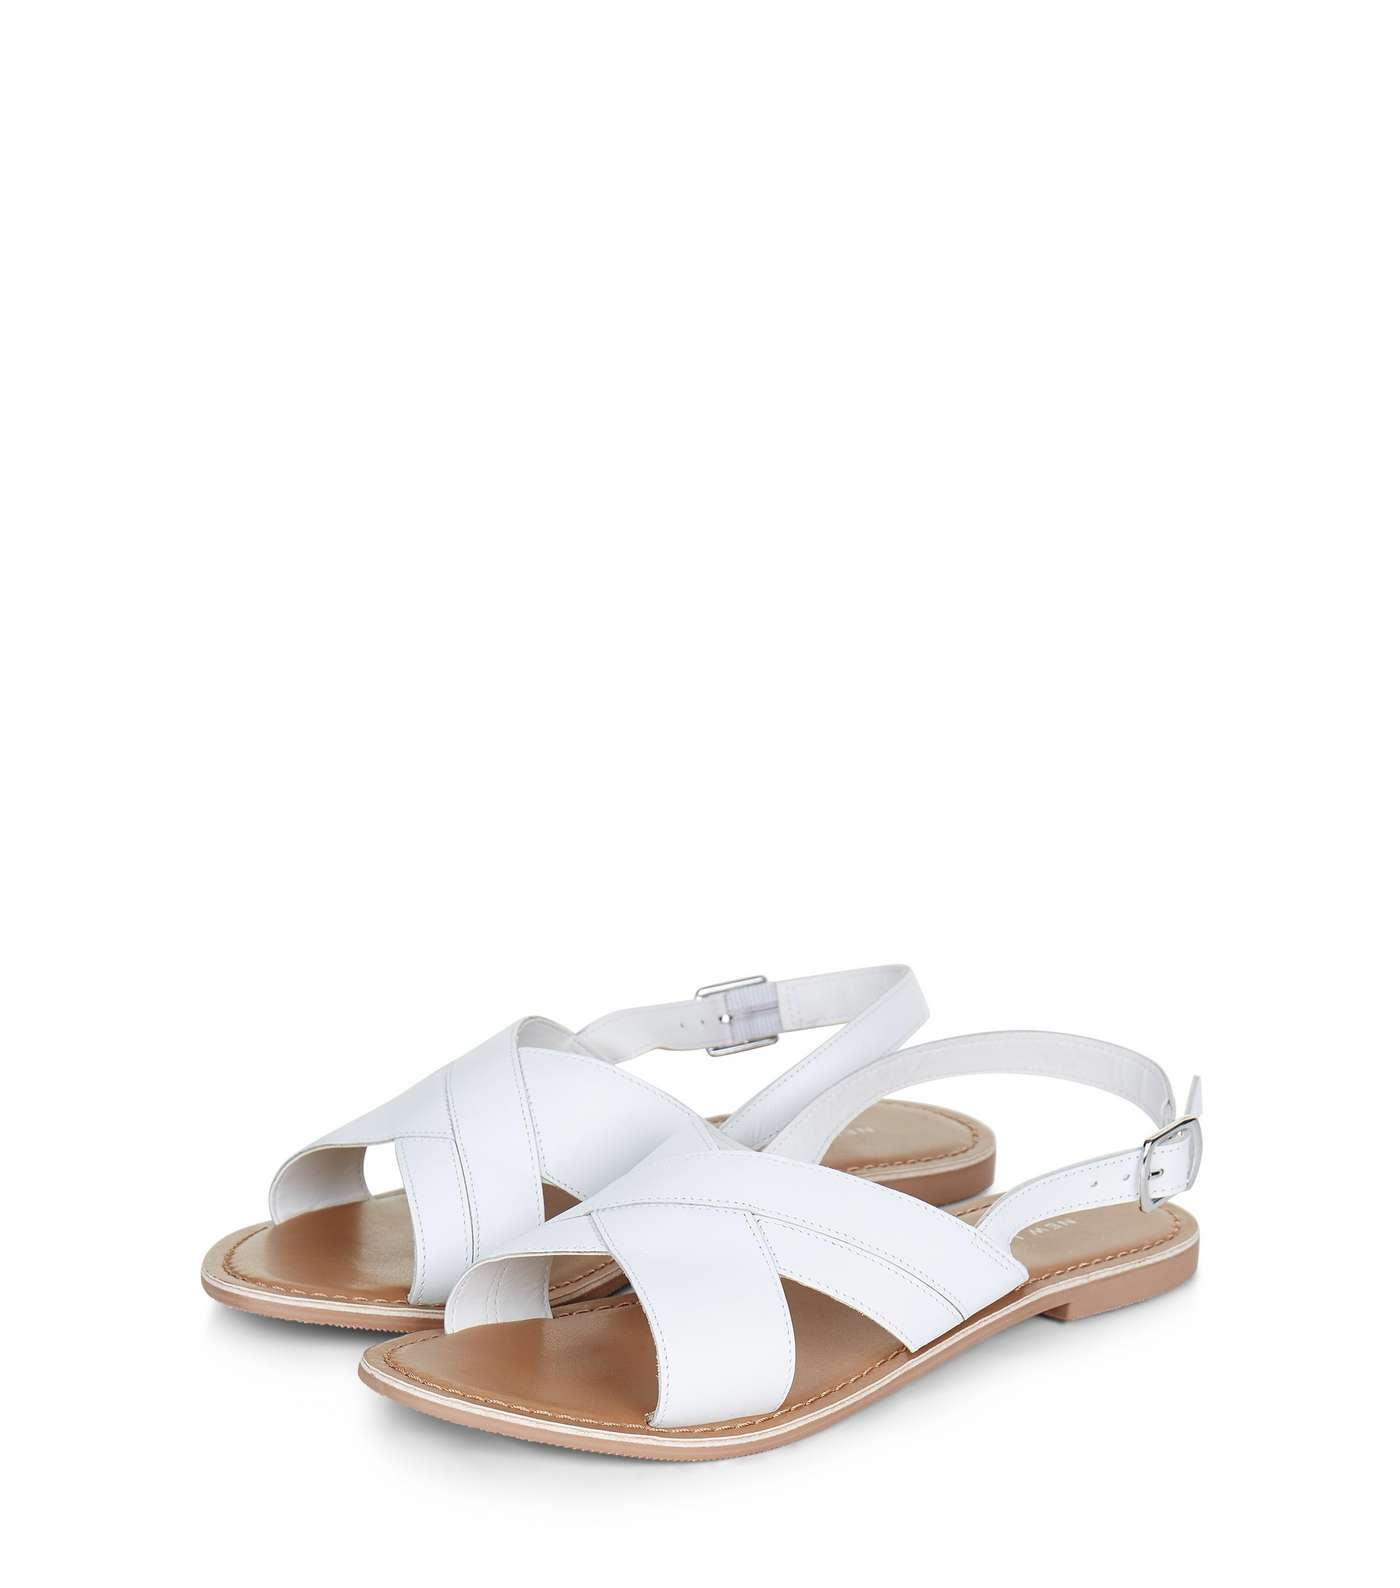 White Leather Cross Strap Slingback Sandals Image 2